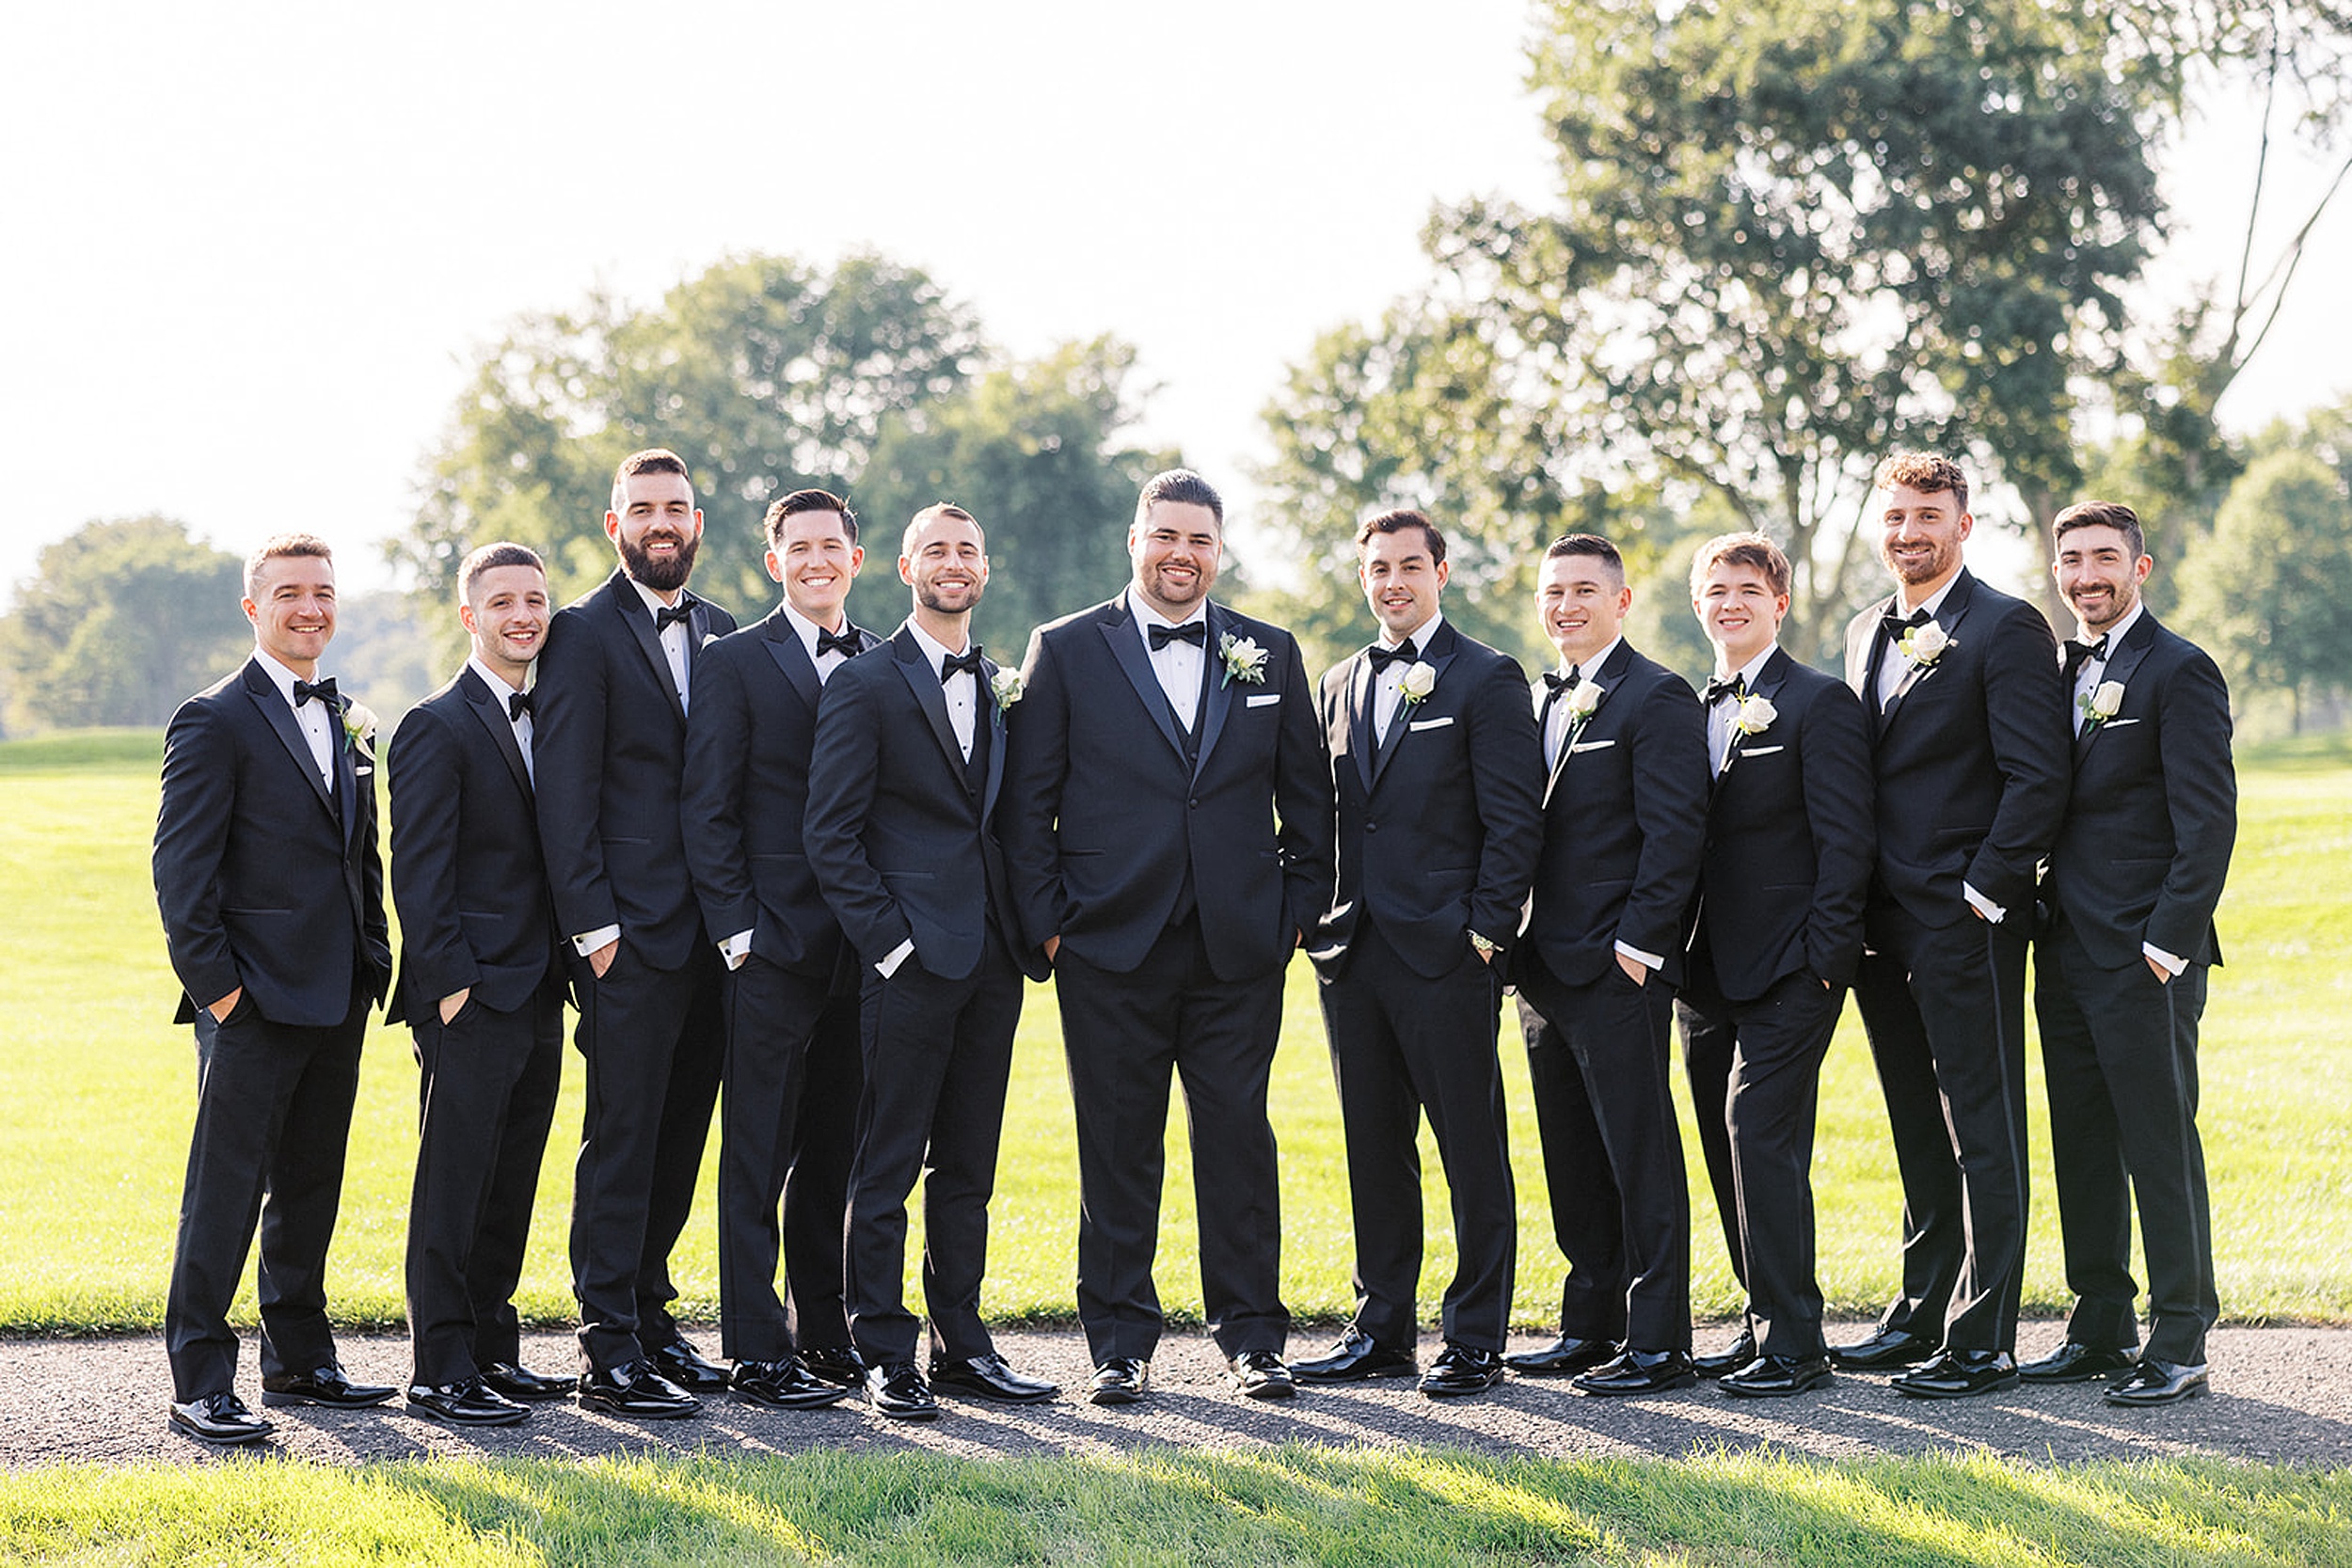 A groom stands in the middle of his ten groomsmen on a golf course path